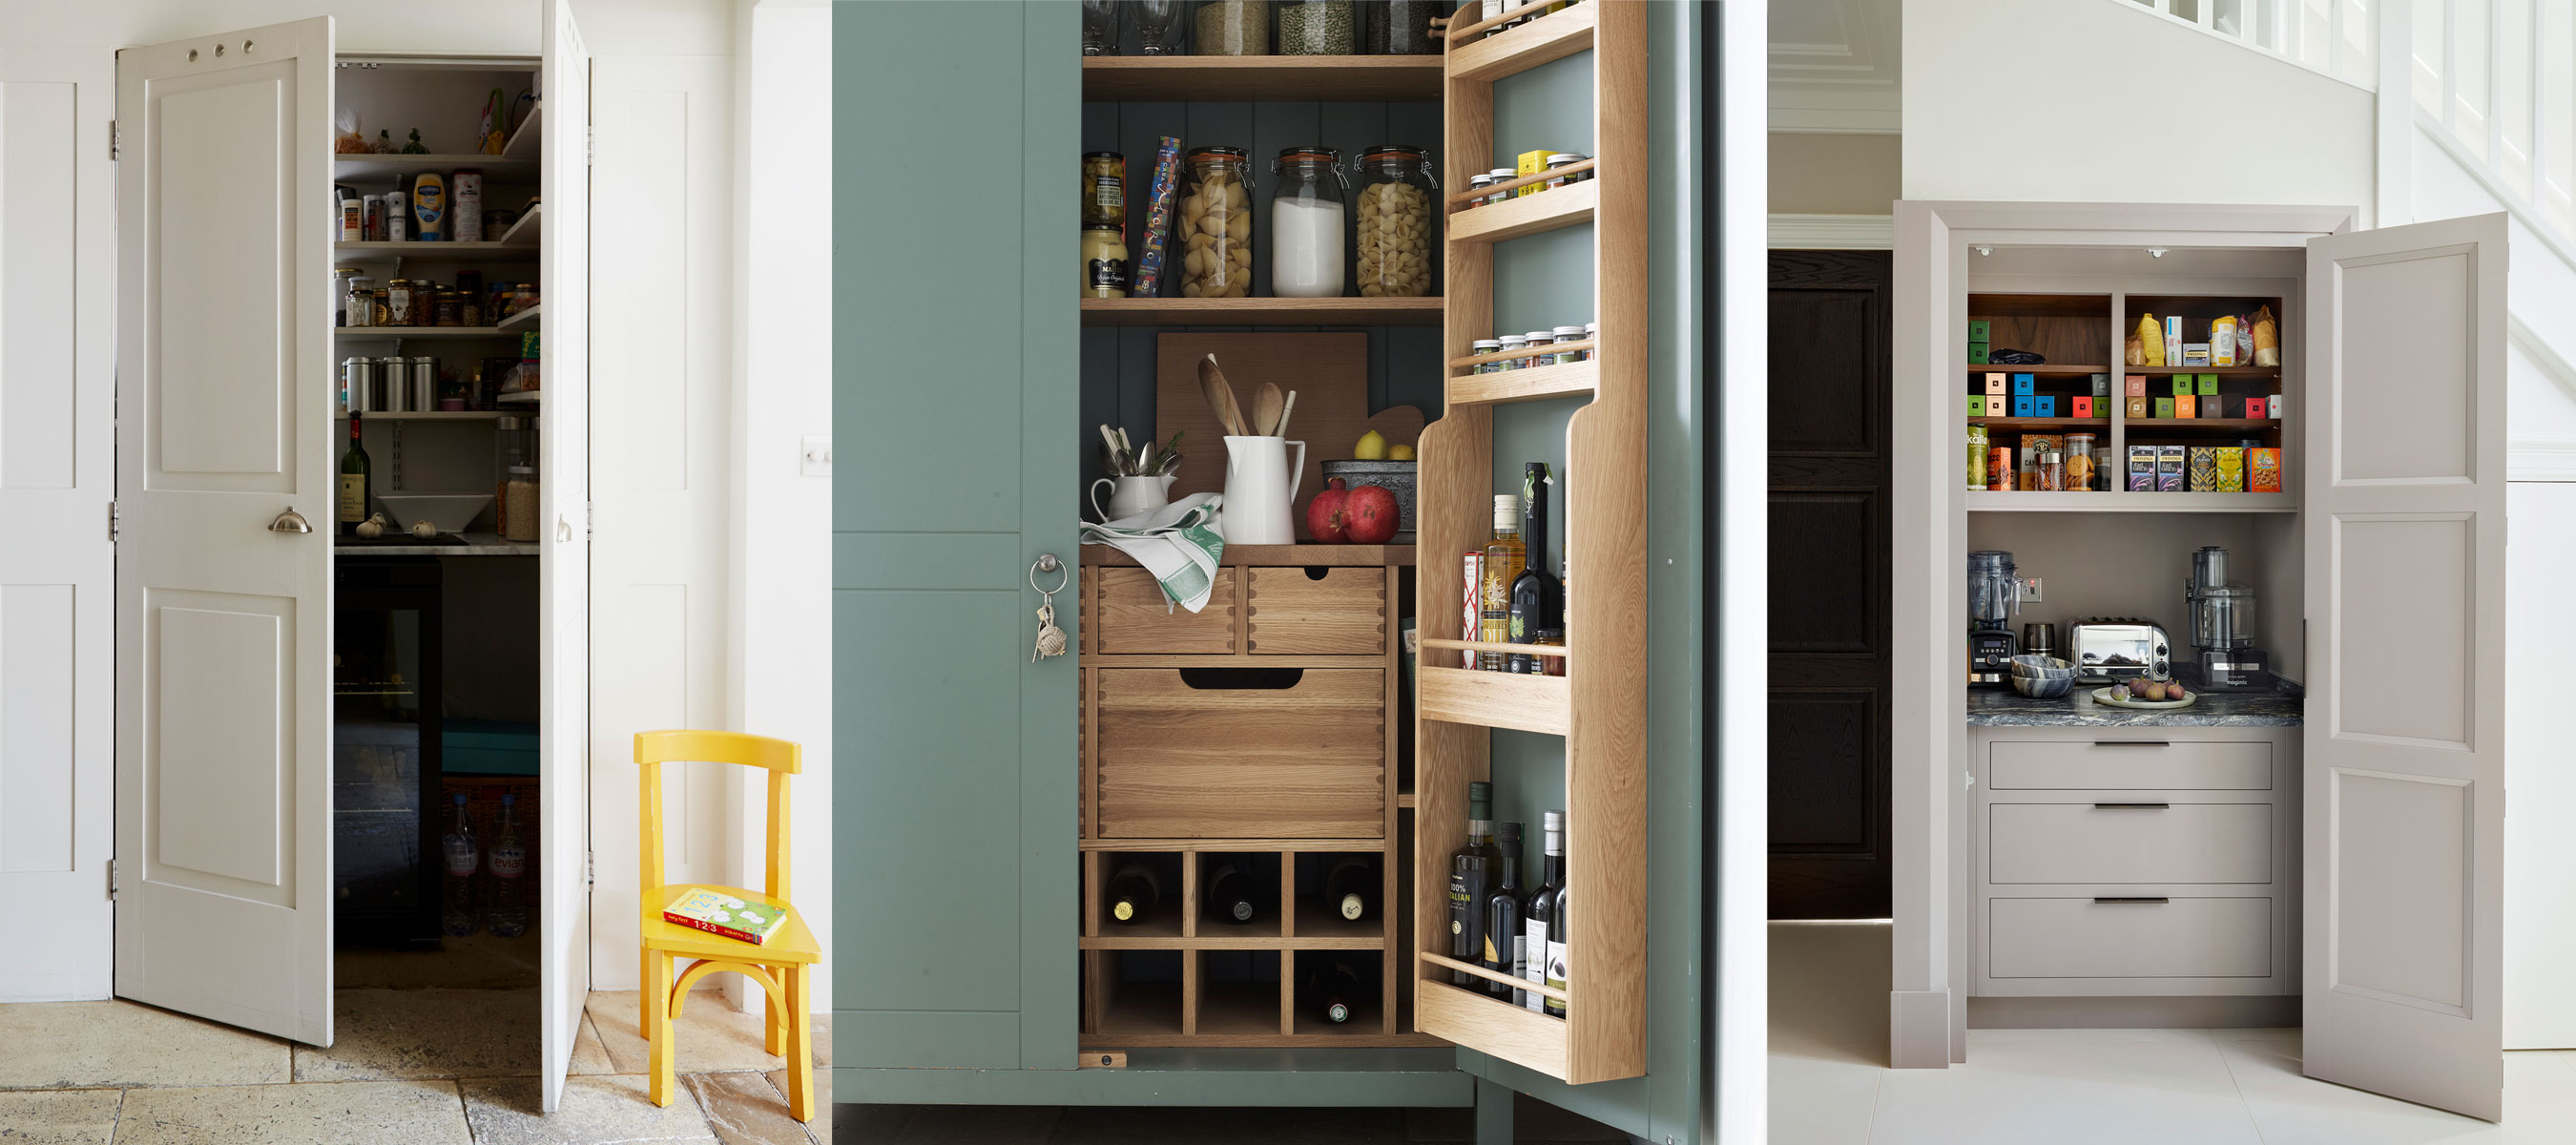 Under stairs pantry ideas – 11 dream larder cupboards to sit beneath a staircase